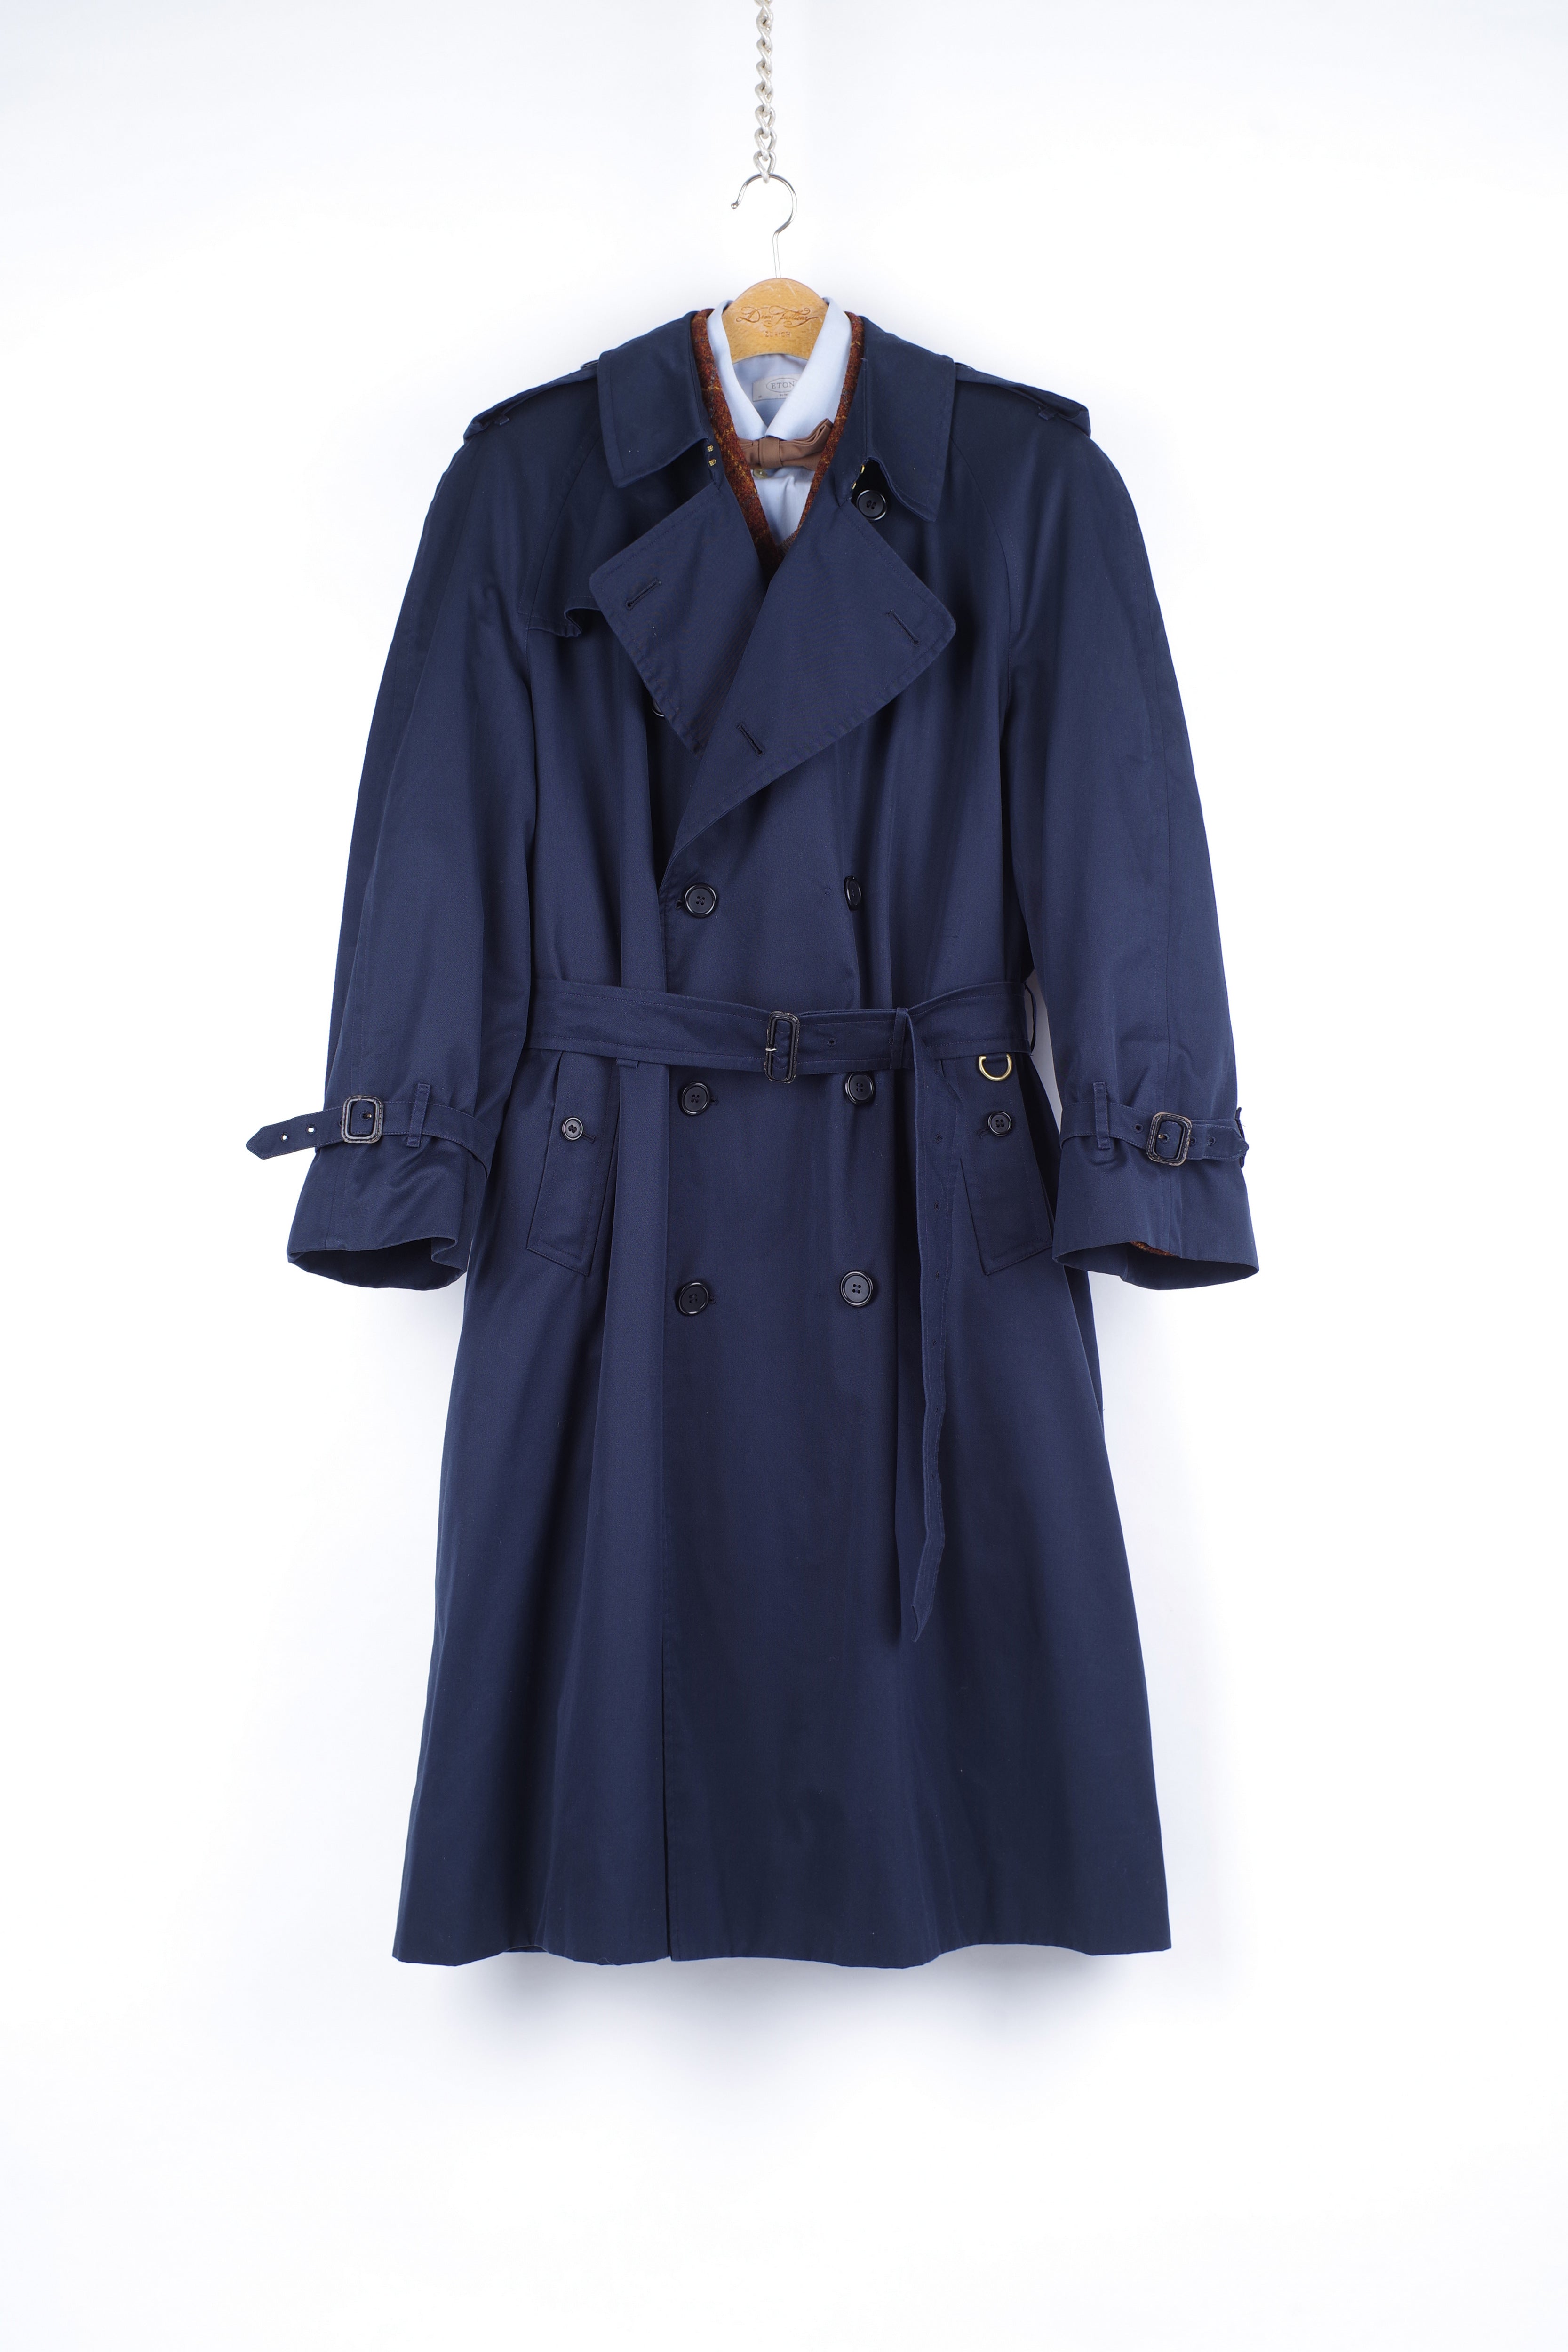 enke klap Daddy Burberry Vintage Navy Blue Trench Coat, Size REG 60, US 50R – SecondFirst